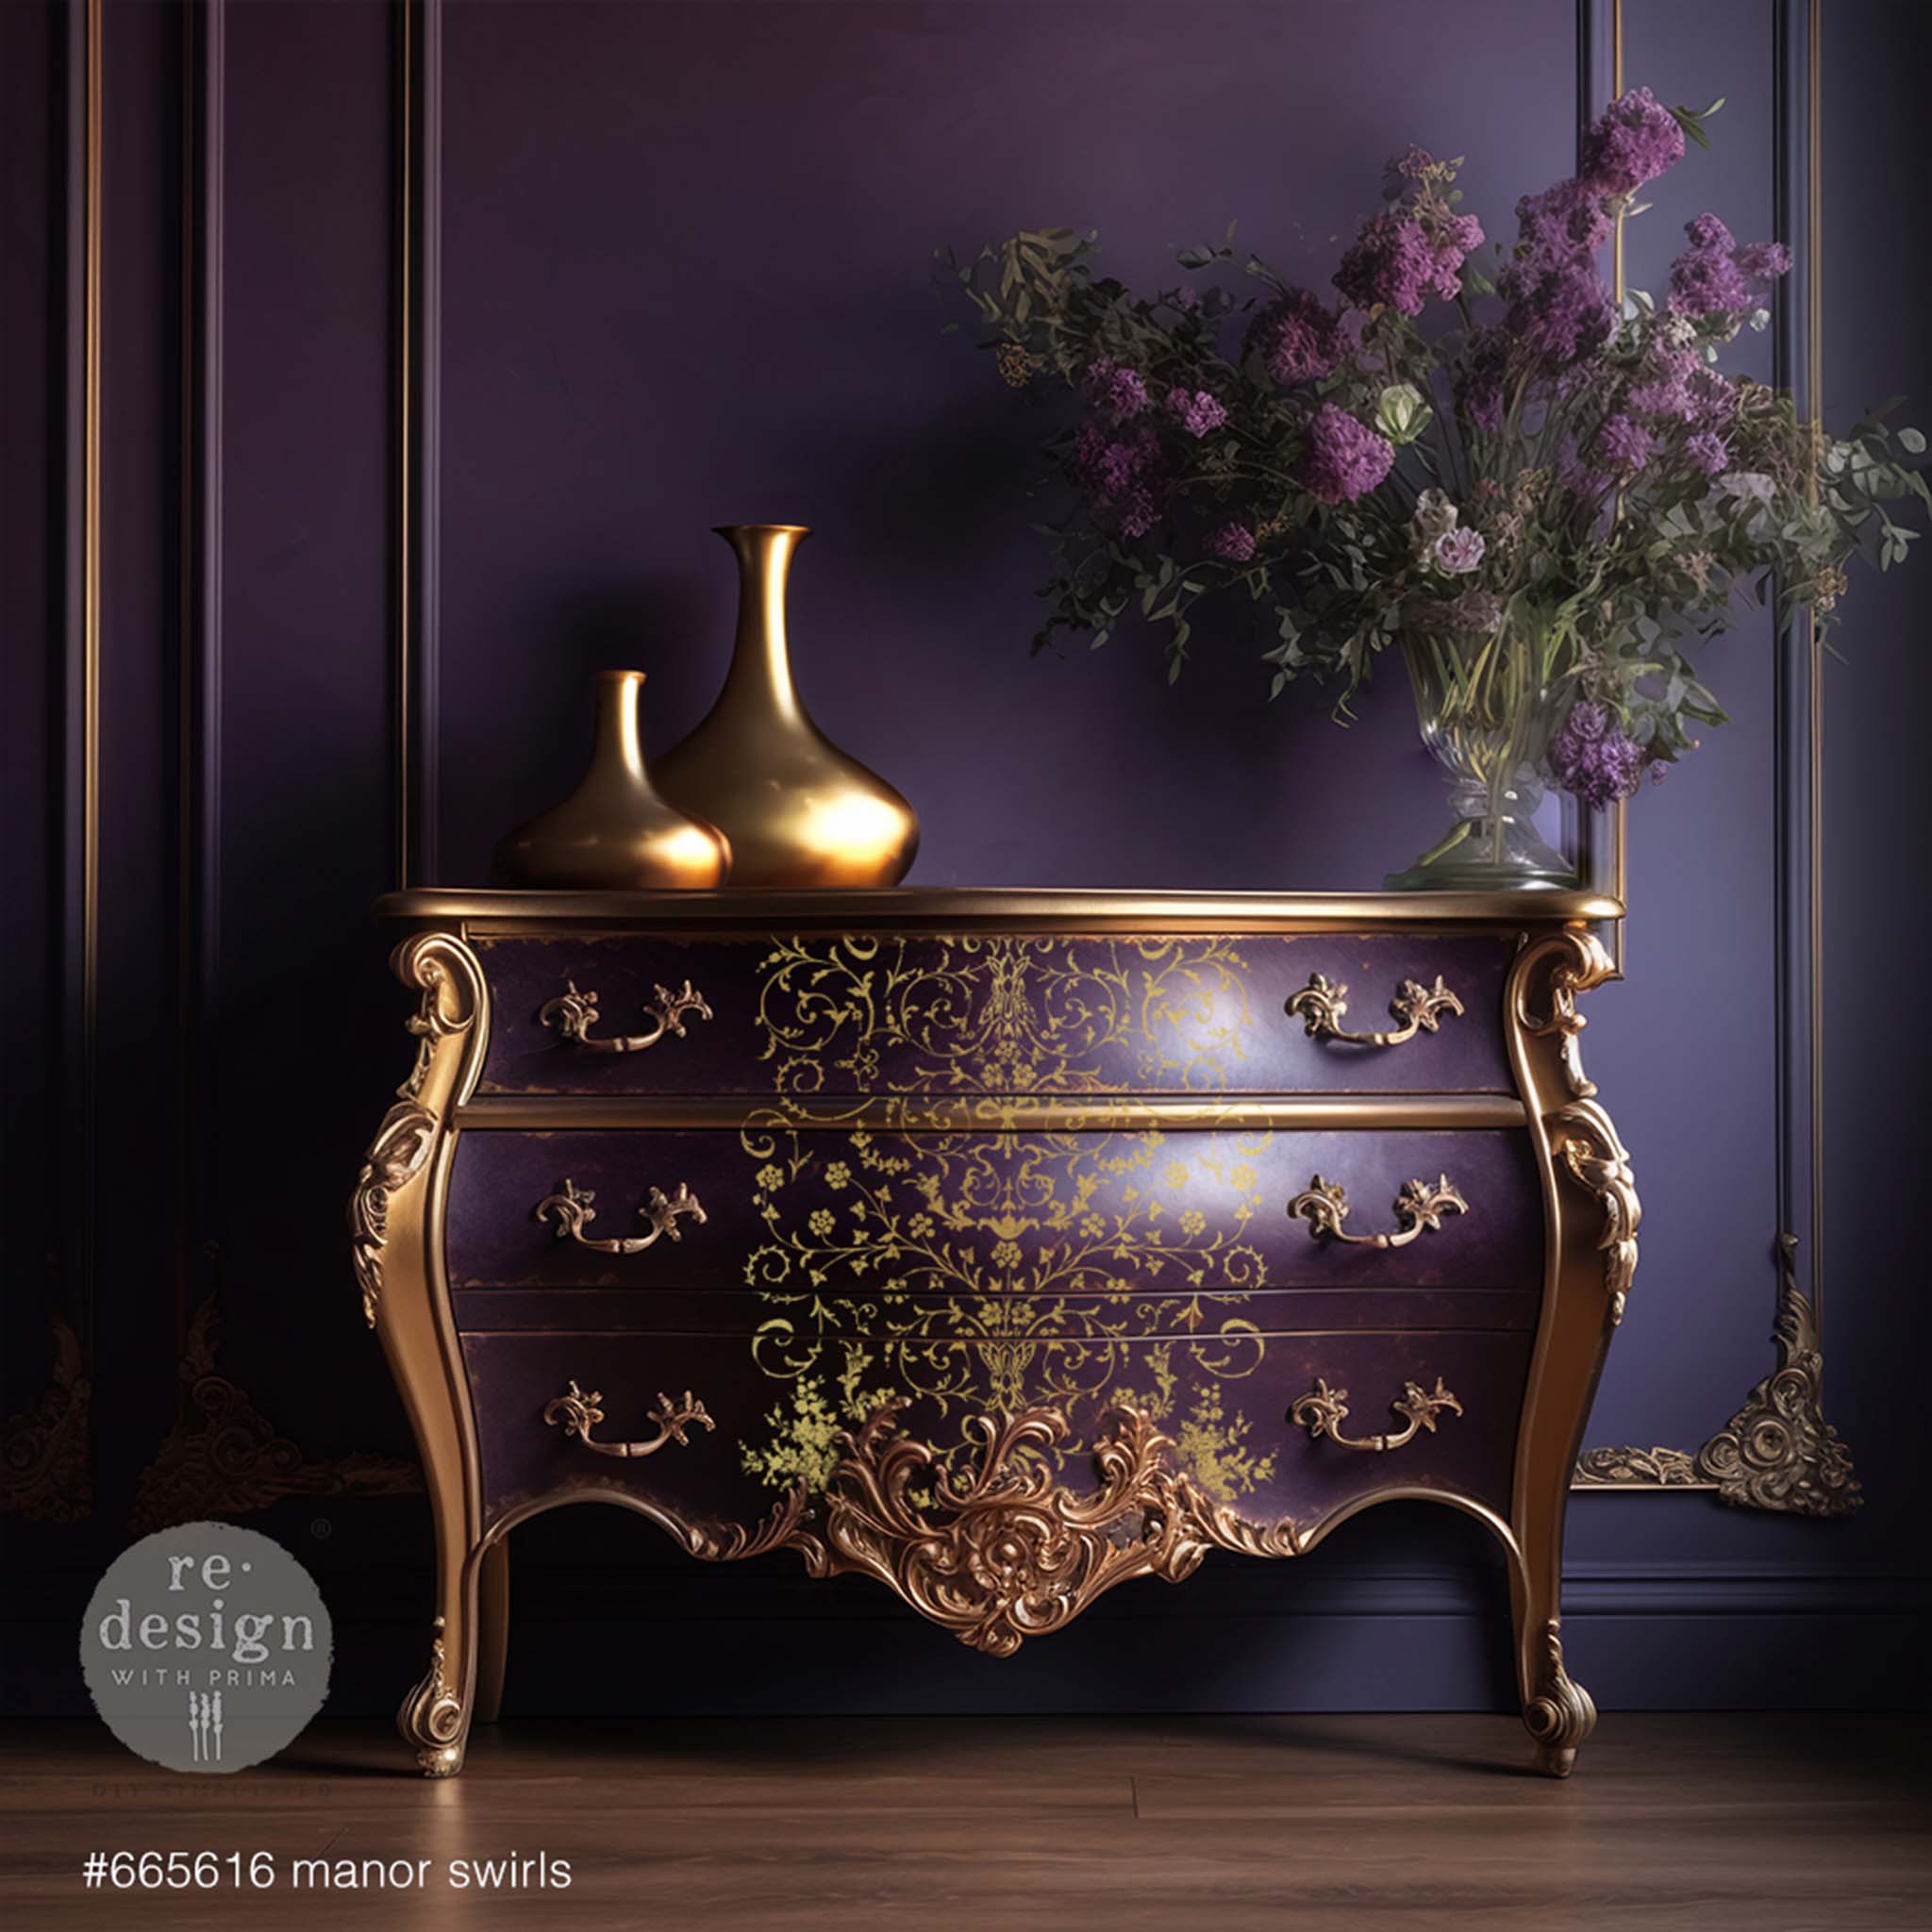 A dark purple and gold bombay style dresser features Kacha Manor Swirls on its 3 drawers.